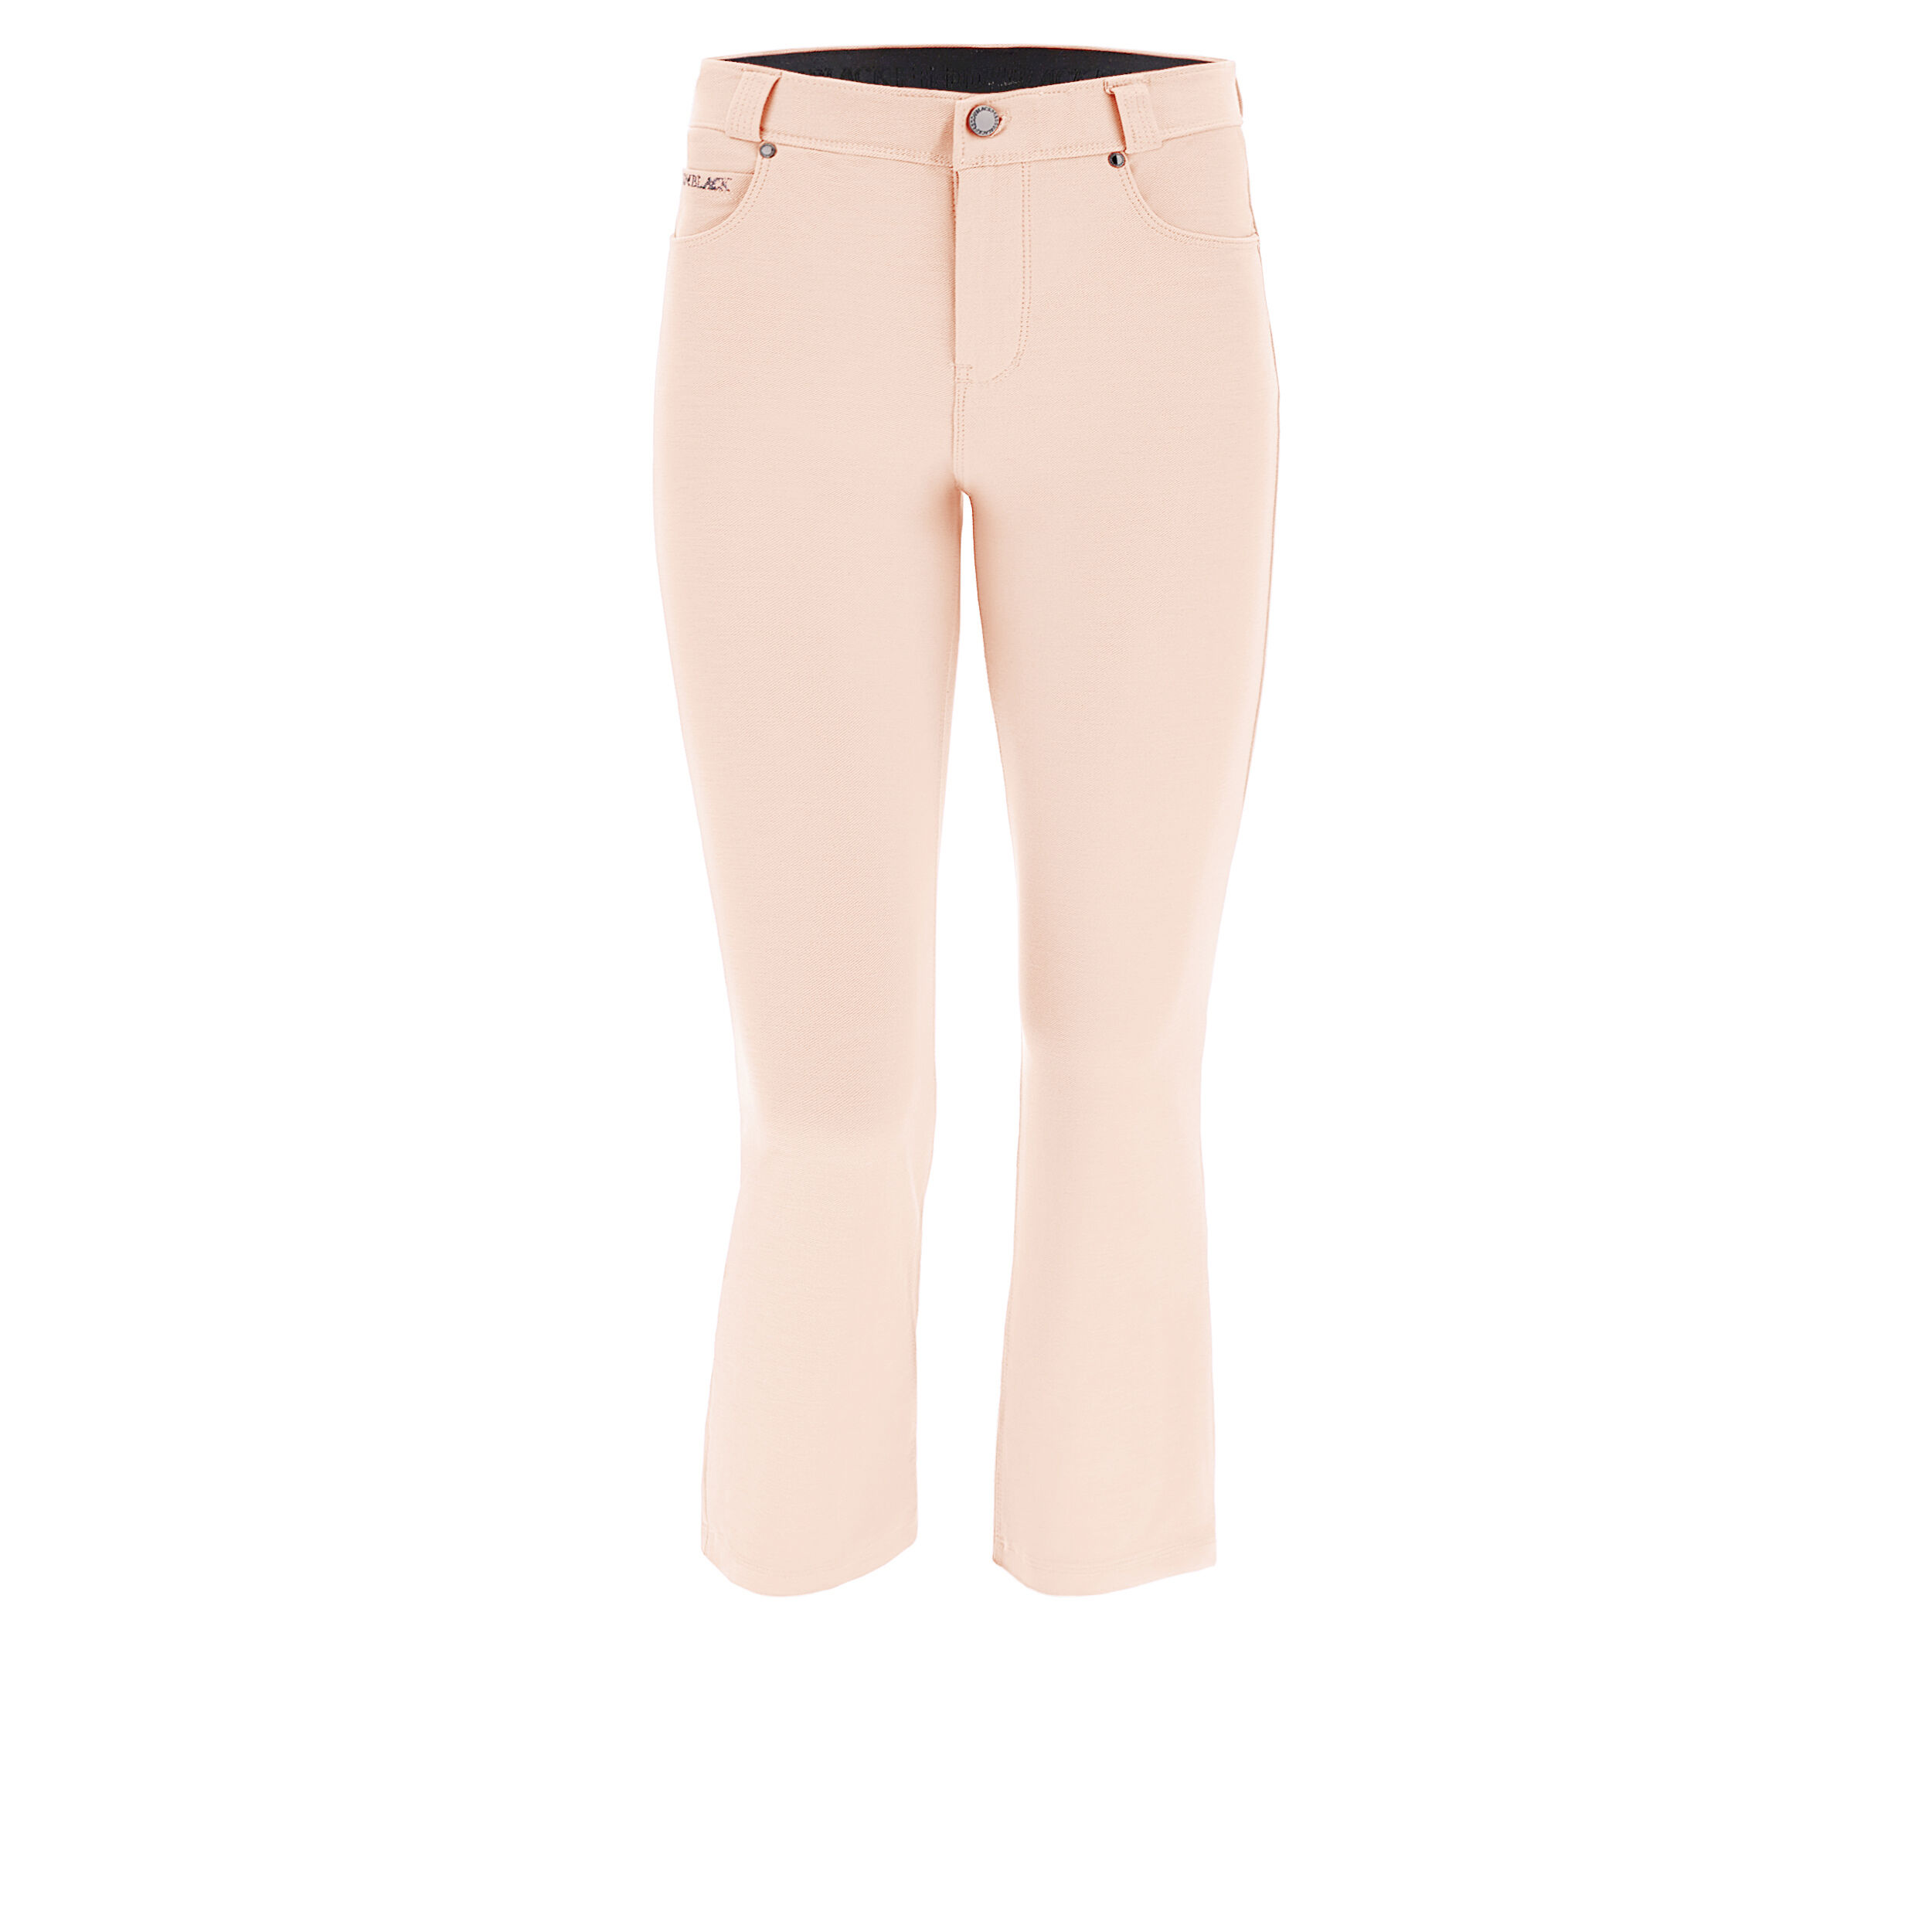 Freddy Pantaloni cropped in jersey drill colorato Peachy Keen Donna Small